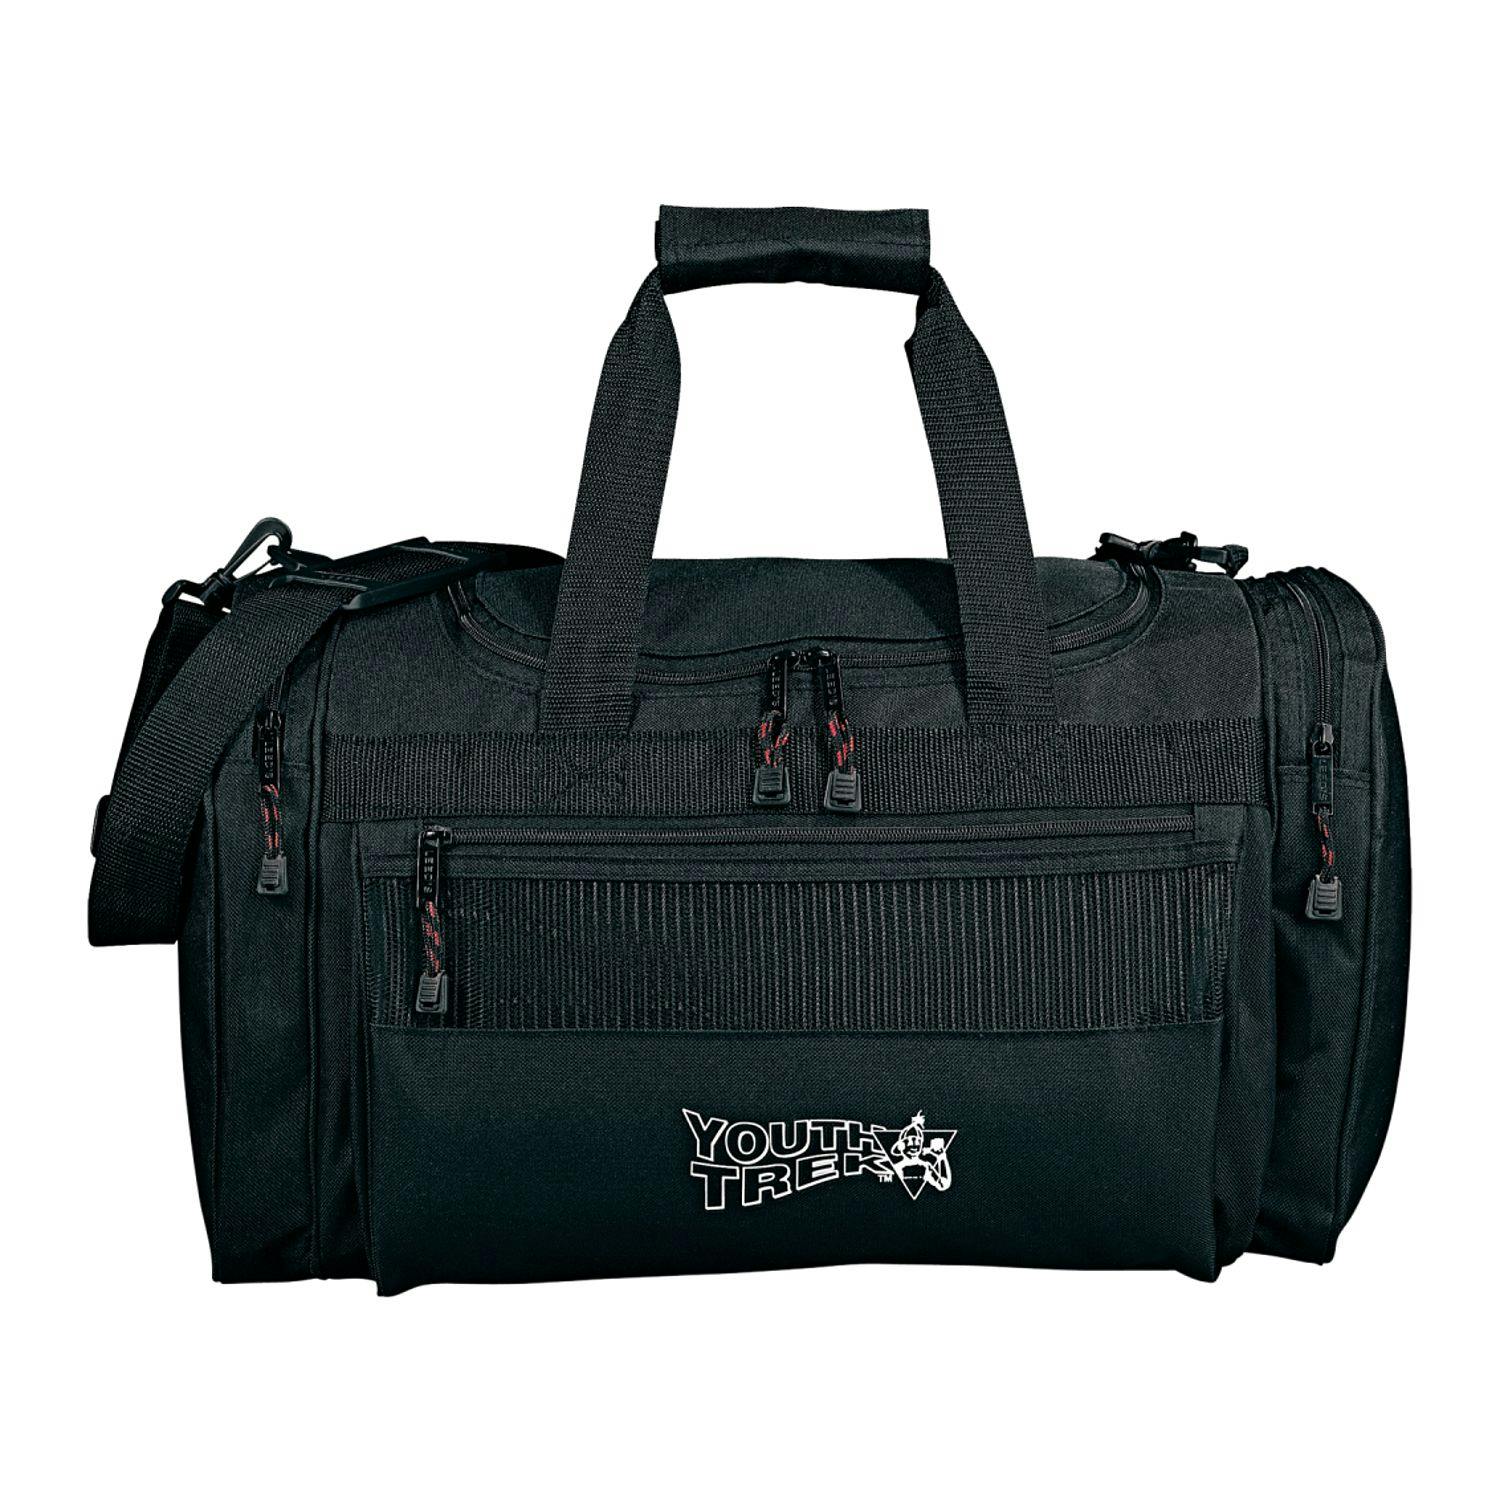 Excel Sport Deluxe 20" Duffel Bag - additional Image 1